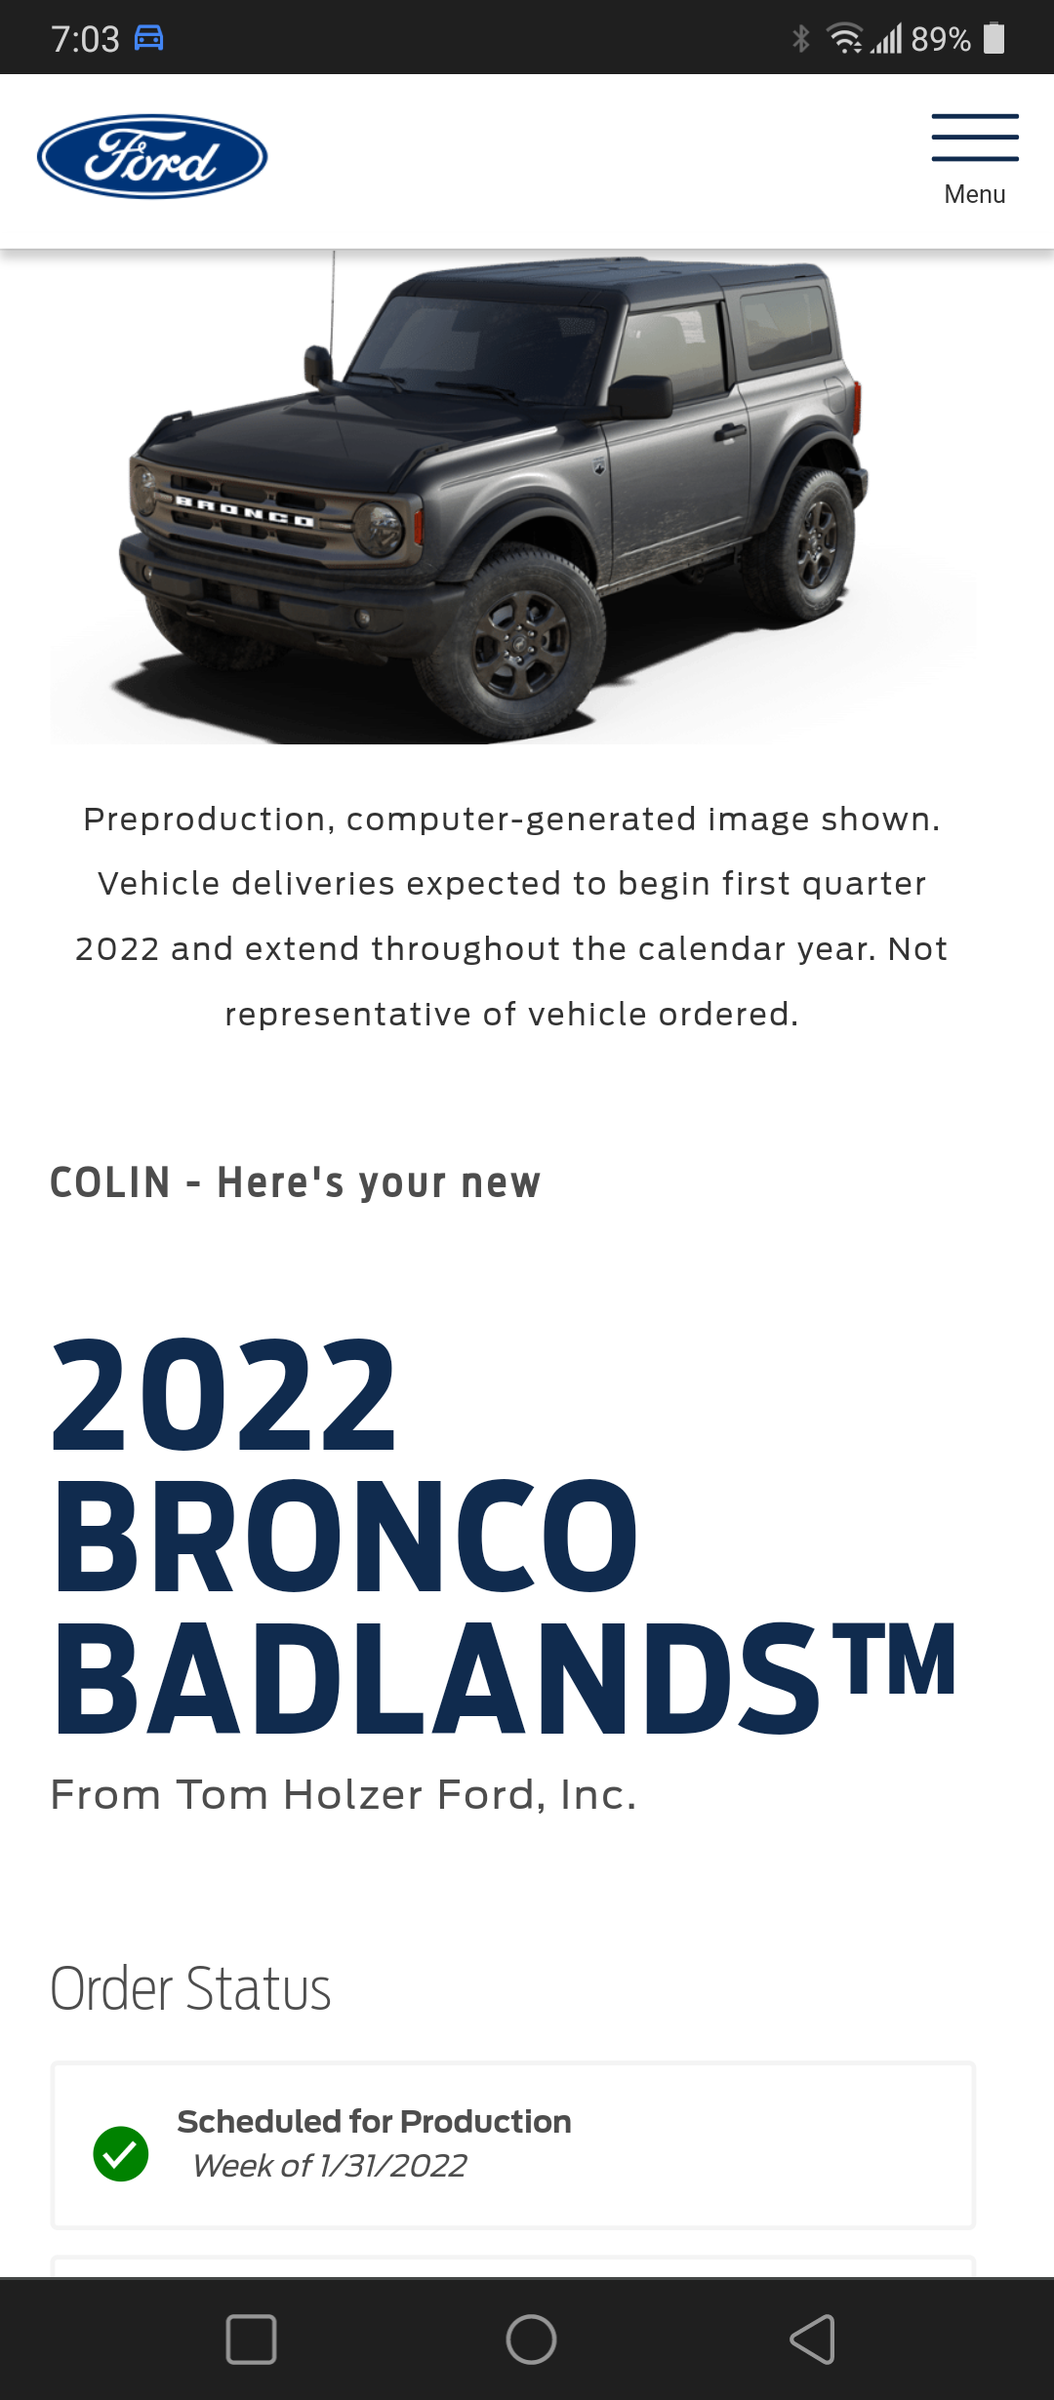 Ford Bronco [SCHEDULING NOW 12/16] ⏱ 2022 Bronco Scheduling Next Week (12/13) For Build Weeks 2/14 and 2/21 Screenshot_20211214-070307